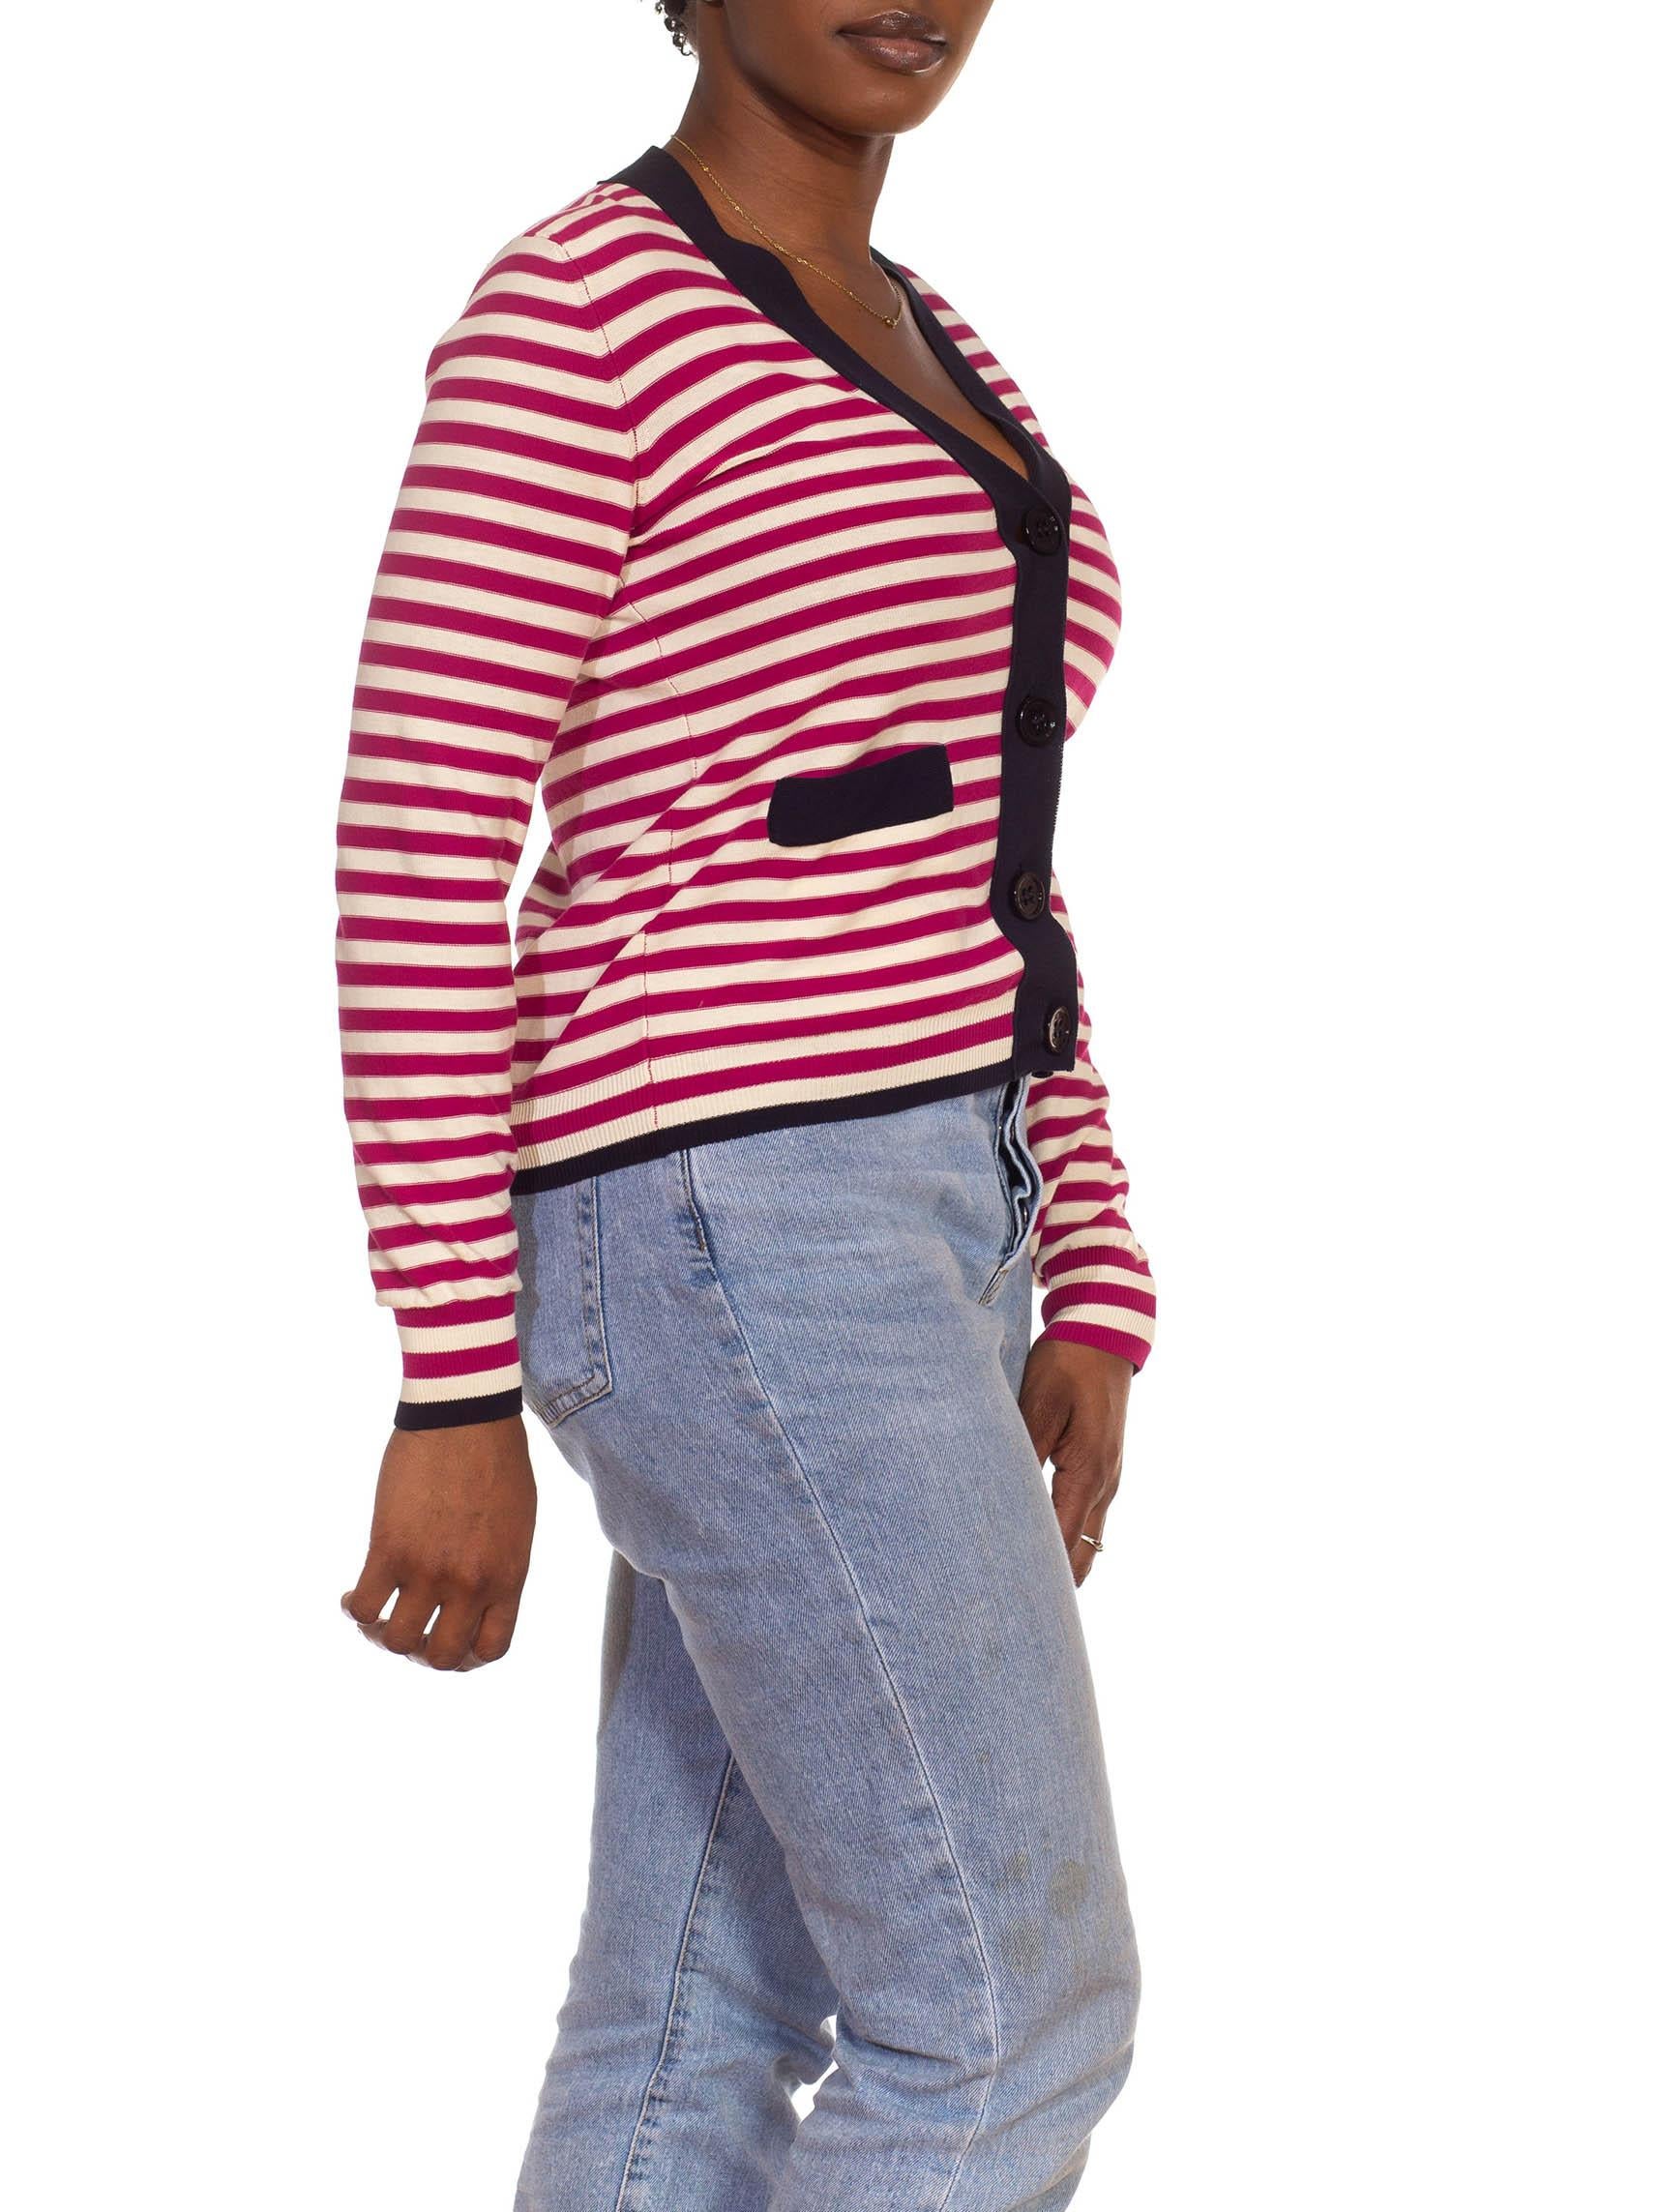 red and white striped cardigan